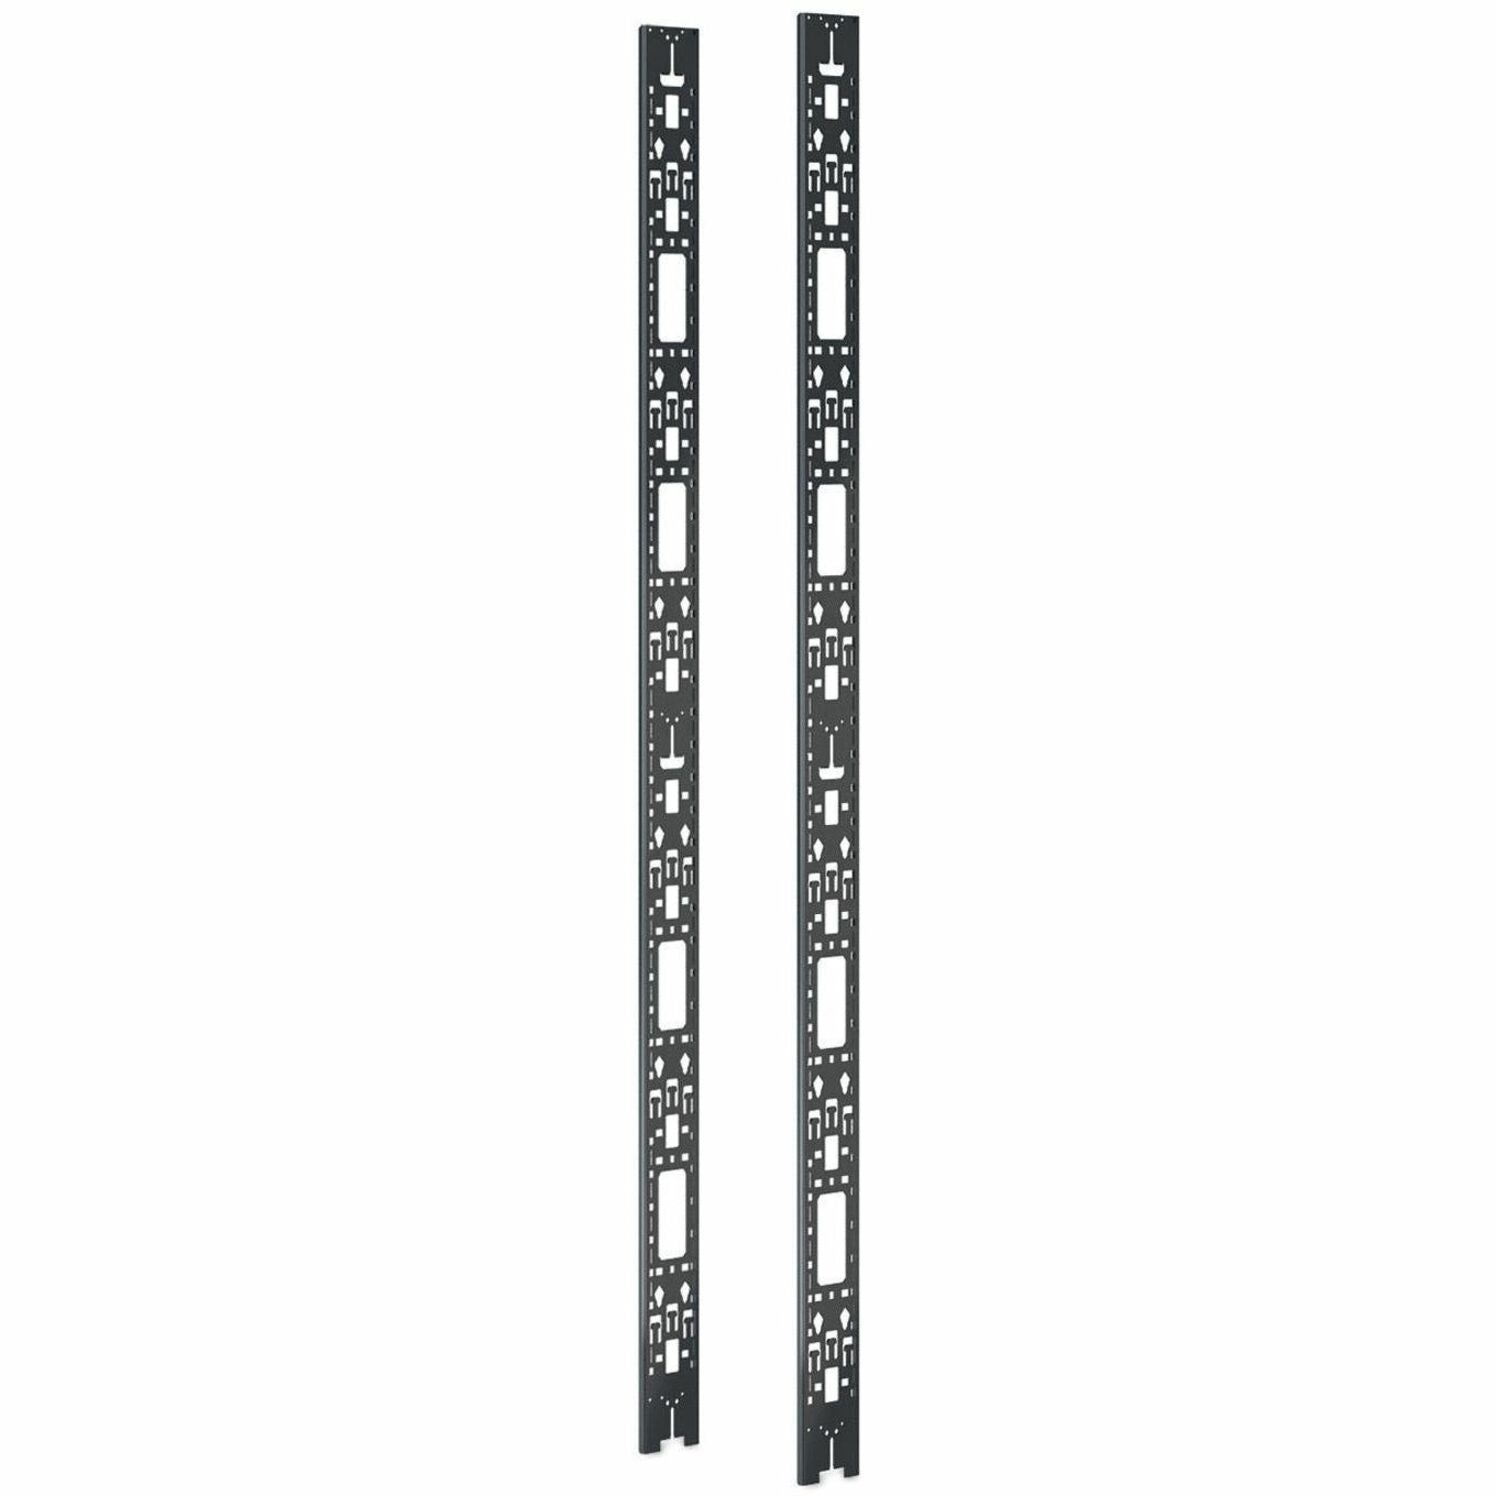 APC NetShelter SX AR7572 Vertical PDU Mount and Cable Organizer, Expanded Cable Management, 0U Rack Space, Black